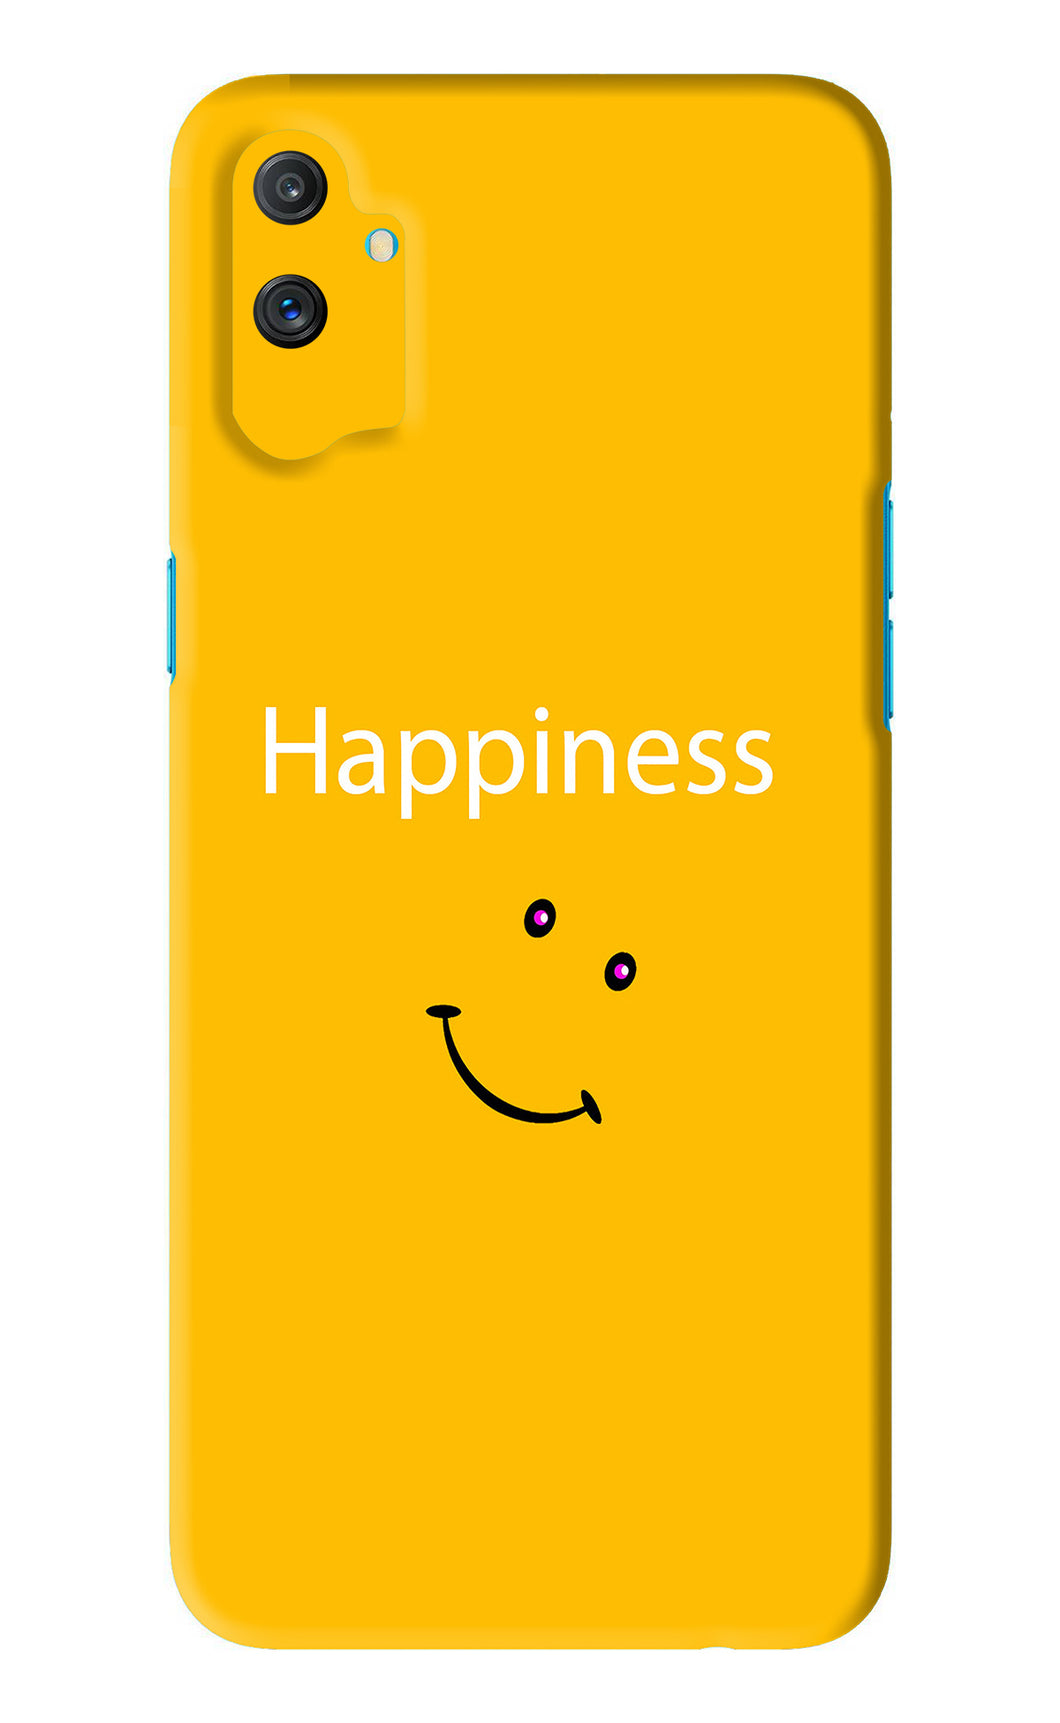 Happiness With Smiley Realme C3 Back Skin Wrap